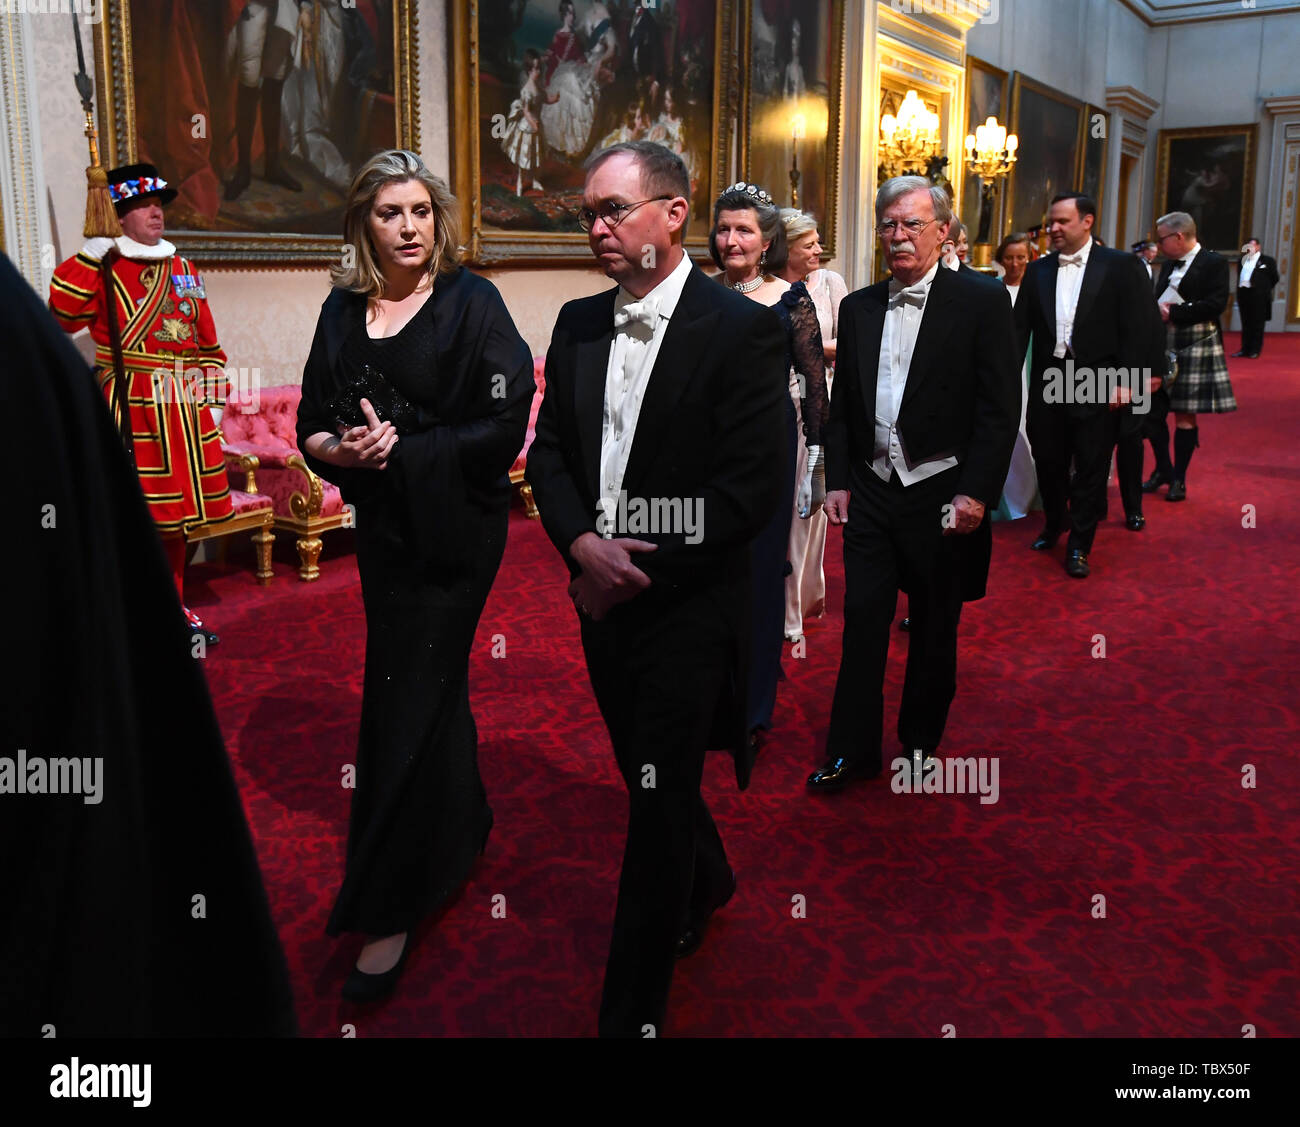 Secretary of State for Defence, Penny Mordaunt and John Michael Mulvaney arrive through the East Gallery during the State Banquet at Buckingham Palace, London, on day one of the US President's three day state visit to the UK. Stock Photo